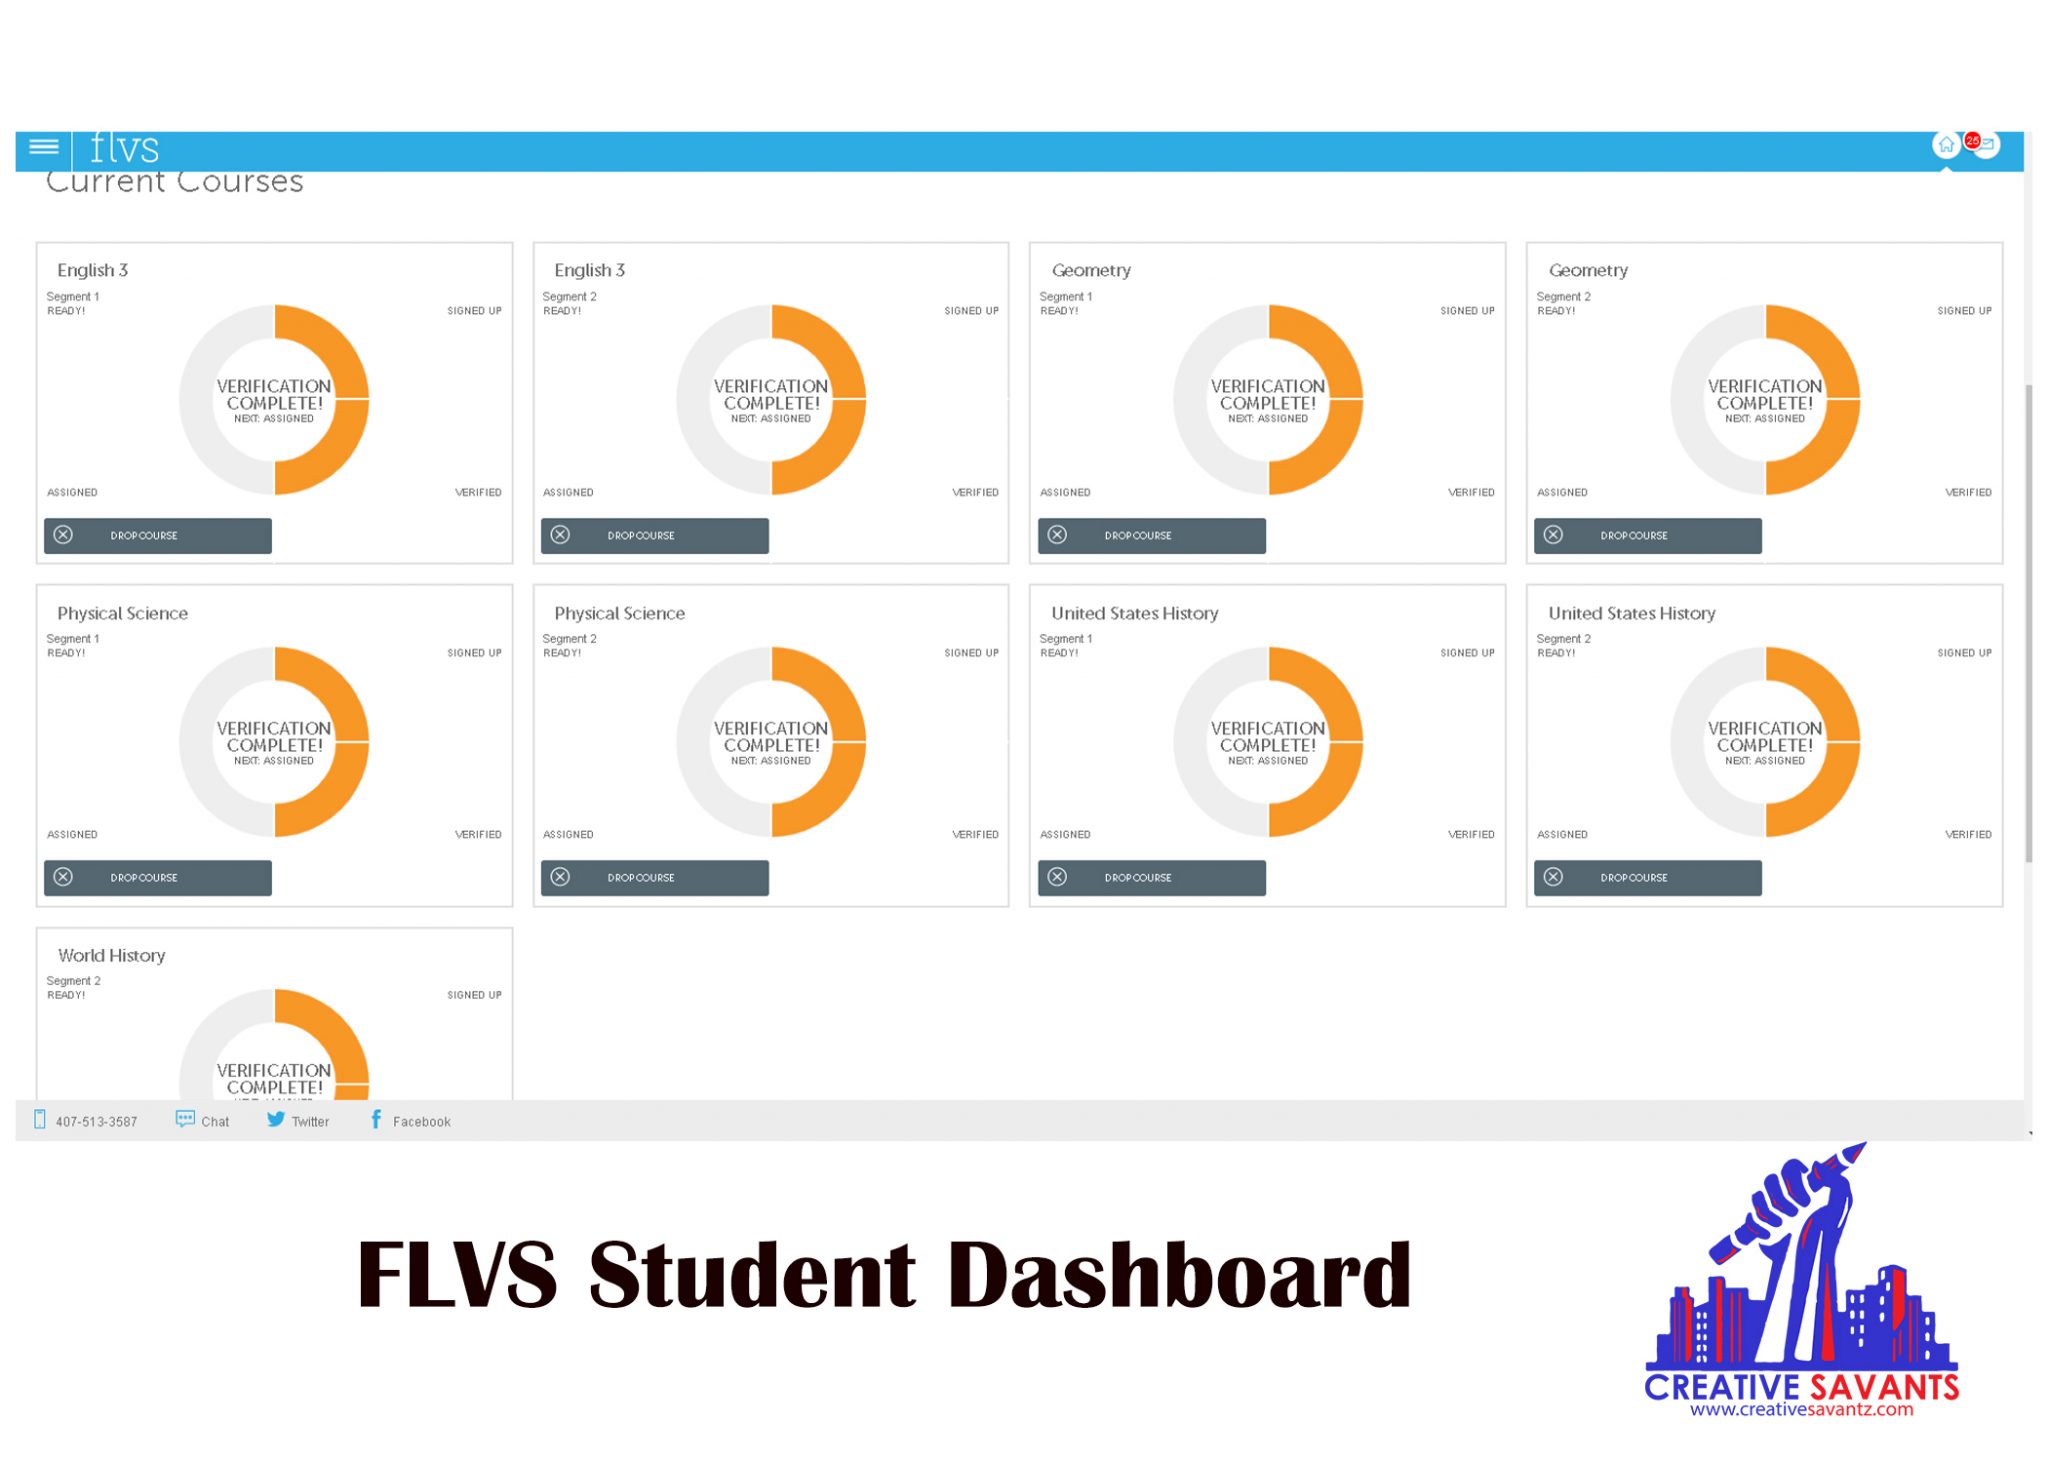 FLVS student dashboard